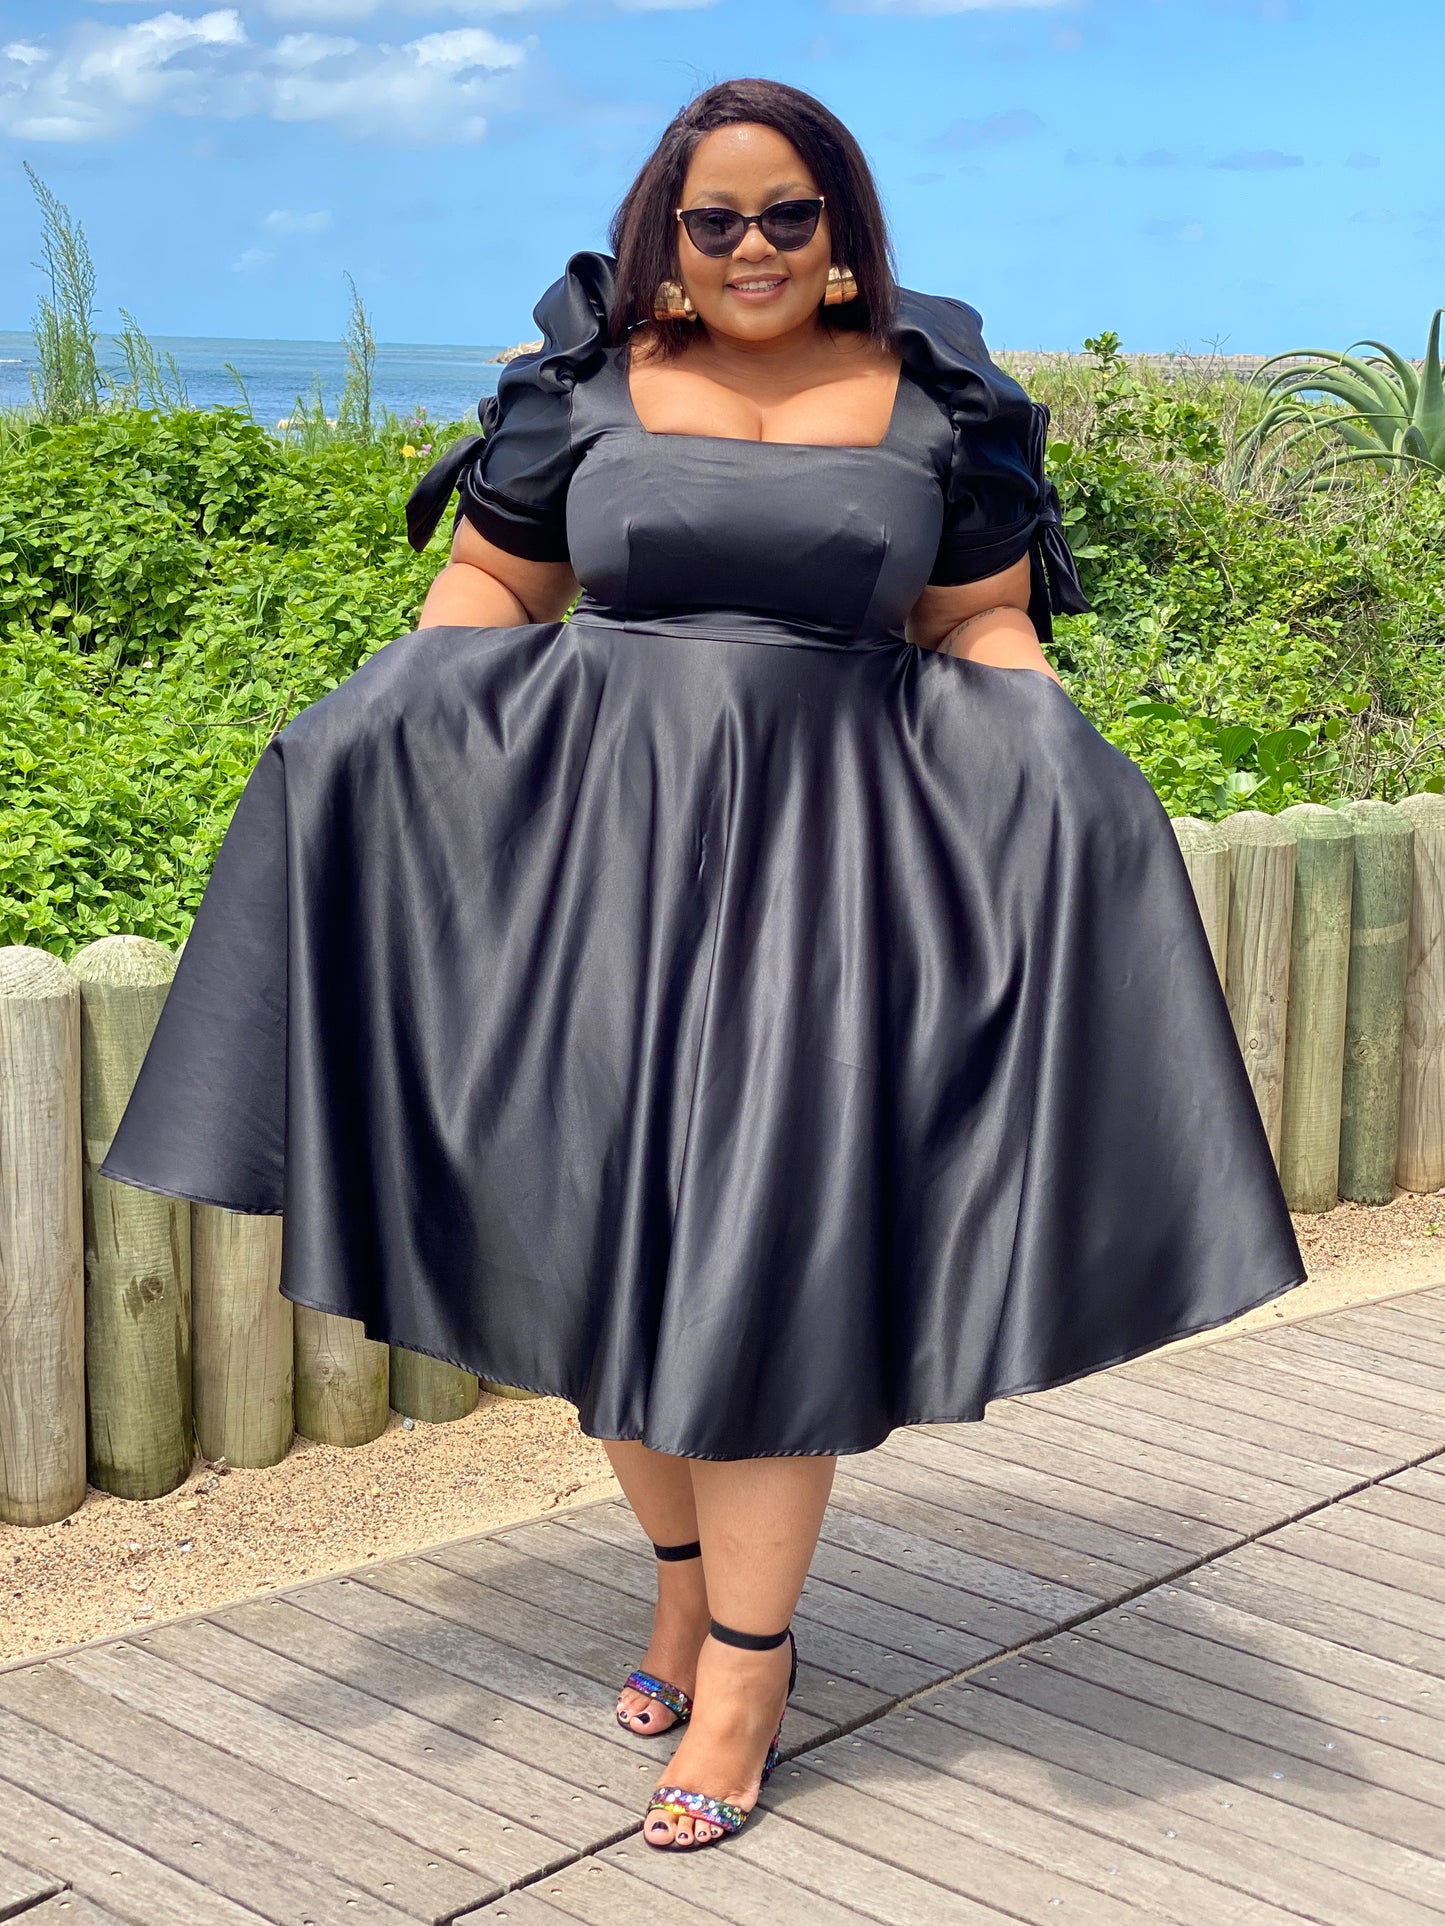 Black duchess dress (allow 3-5 days for completion of order)